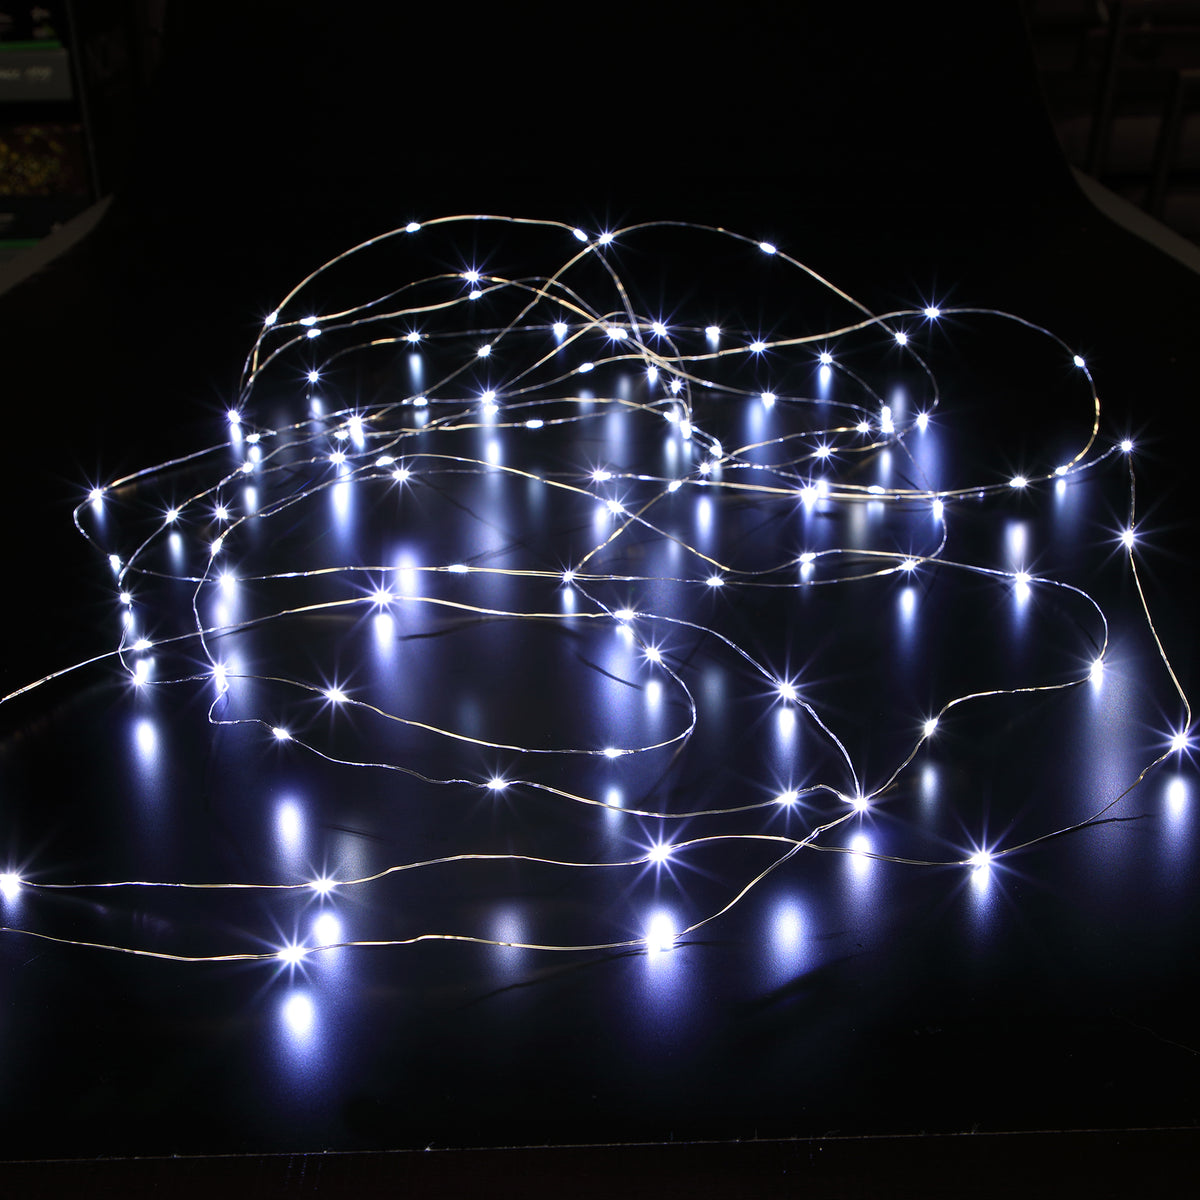 Noma Christmas Fit &amp; Forget Bright White Micro Wire LED String Lights - Battery Operated